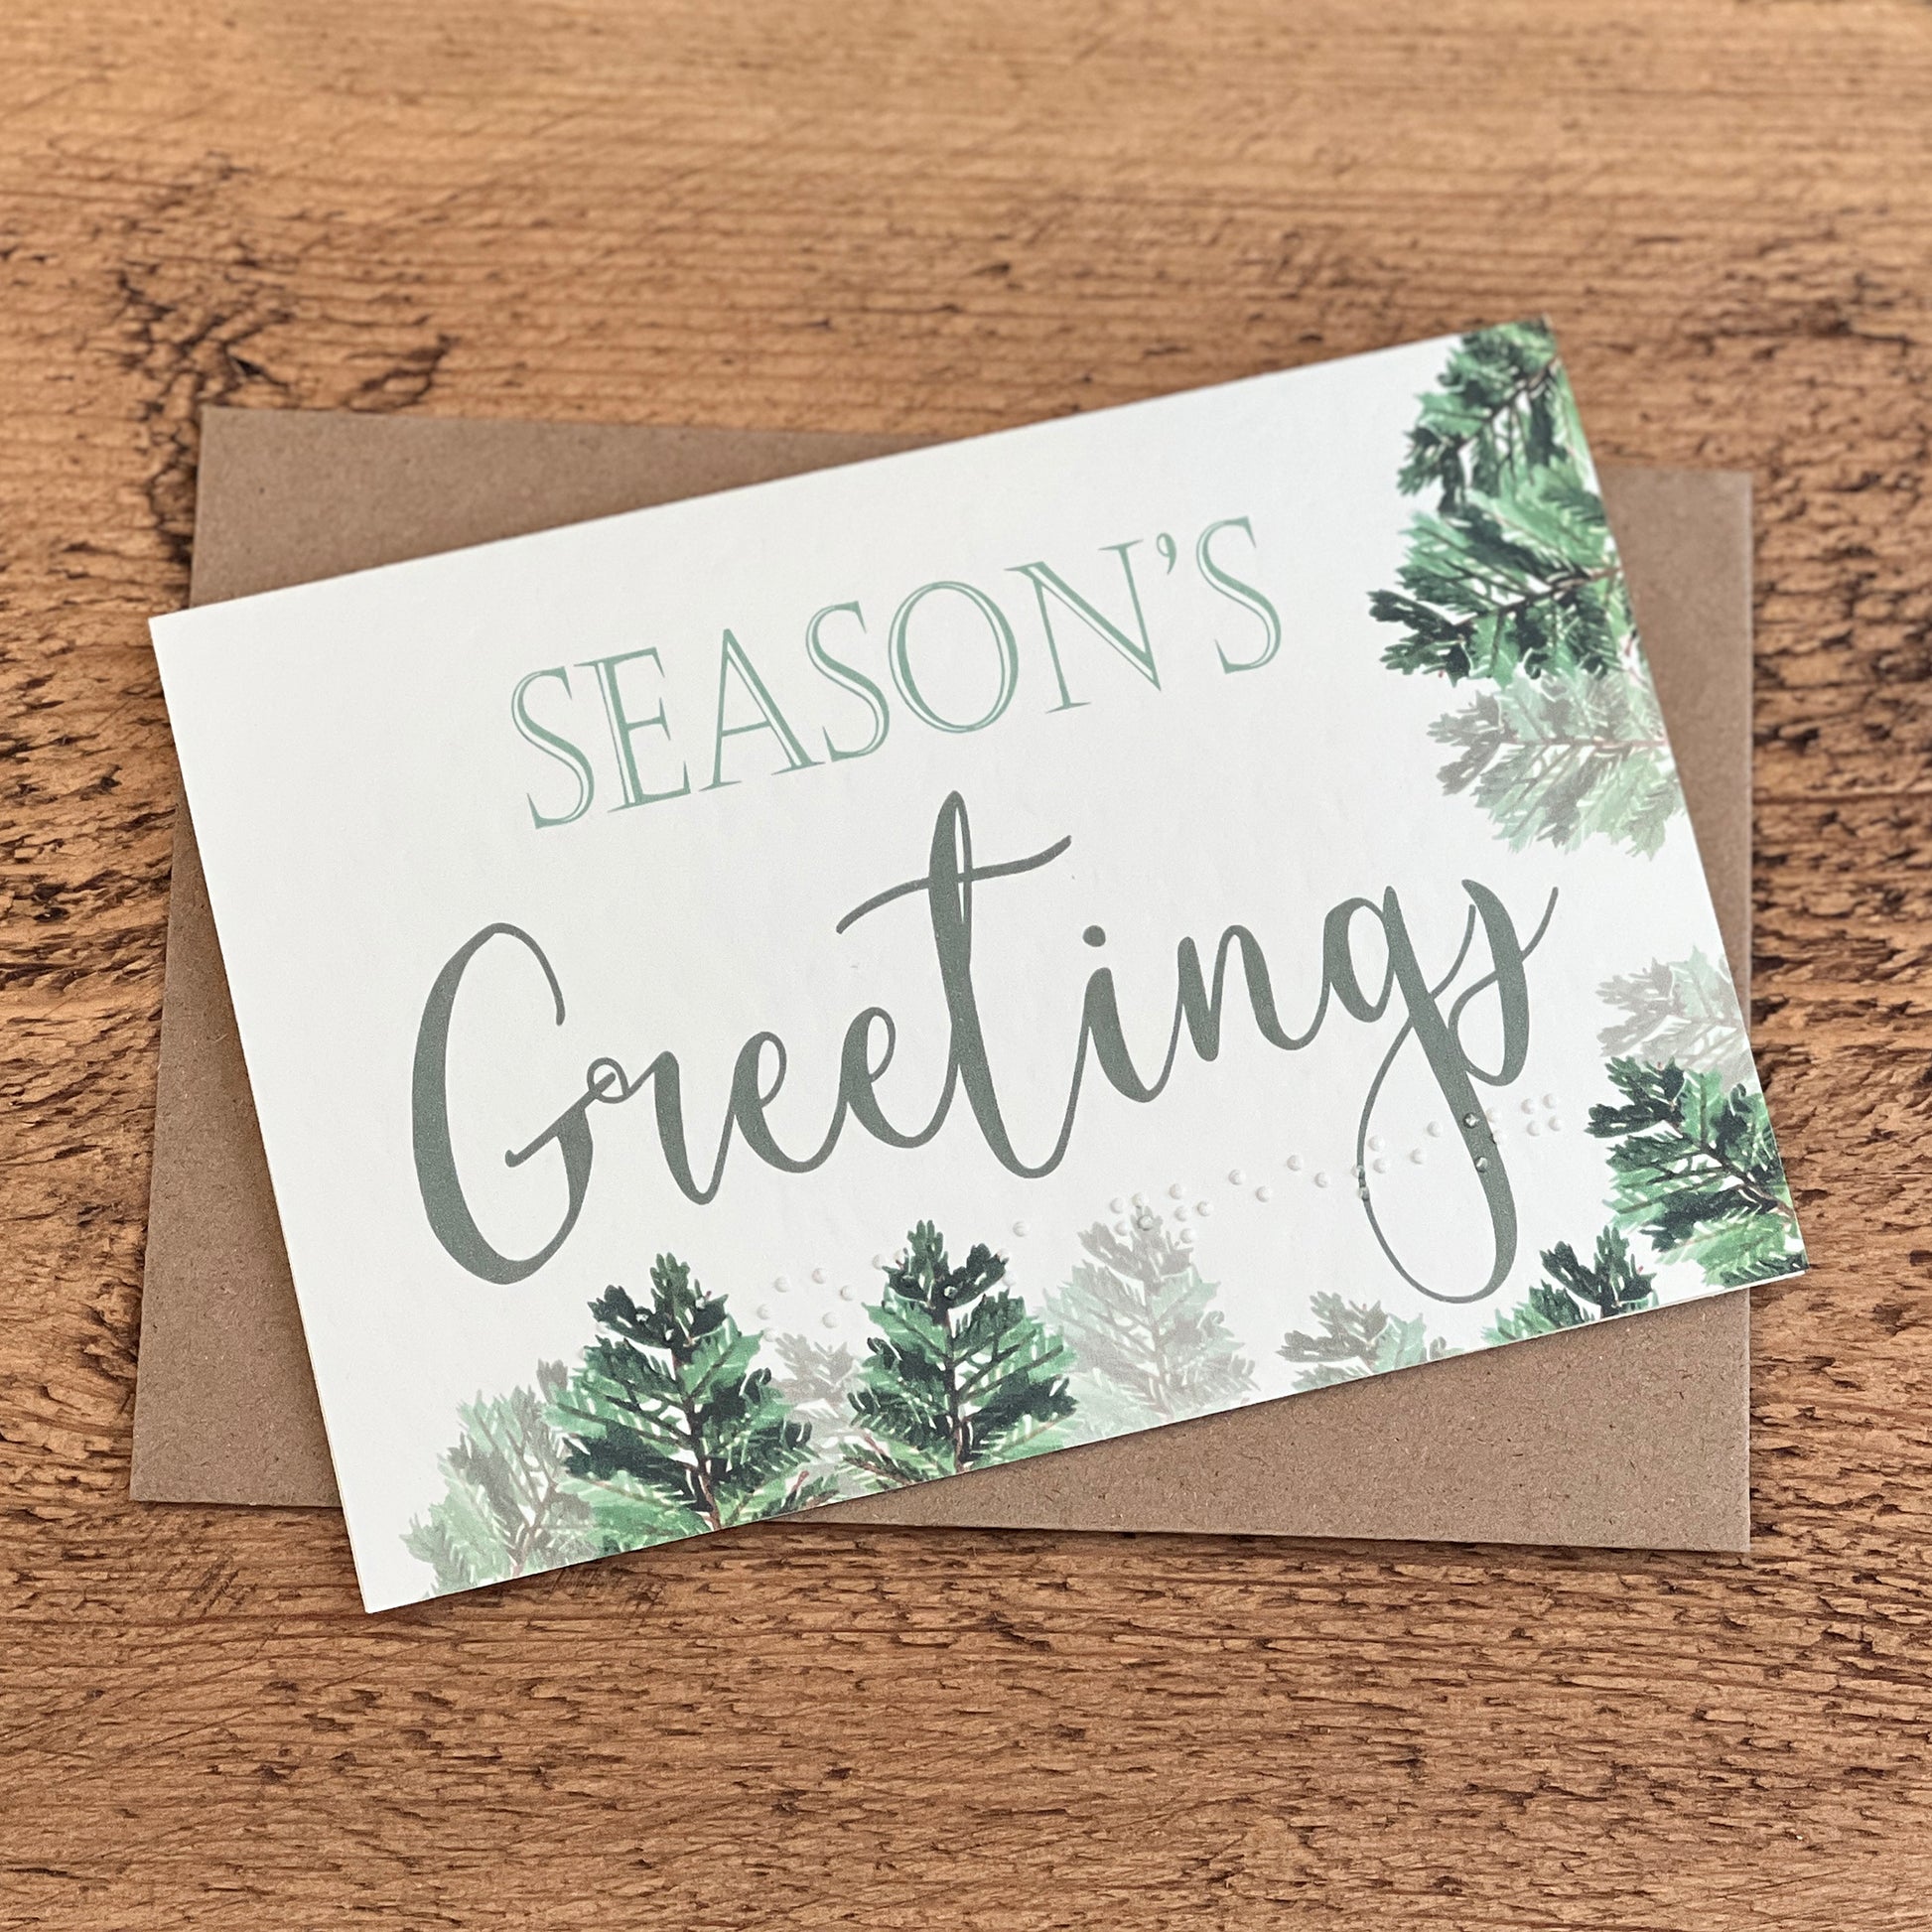 A textured white card with Season's Greetings written in a green font with foliage around the card, the same text is written in braille along the bottom.